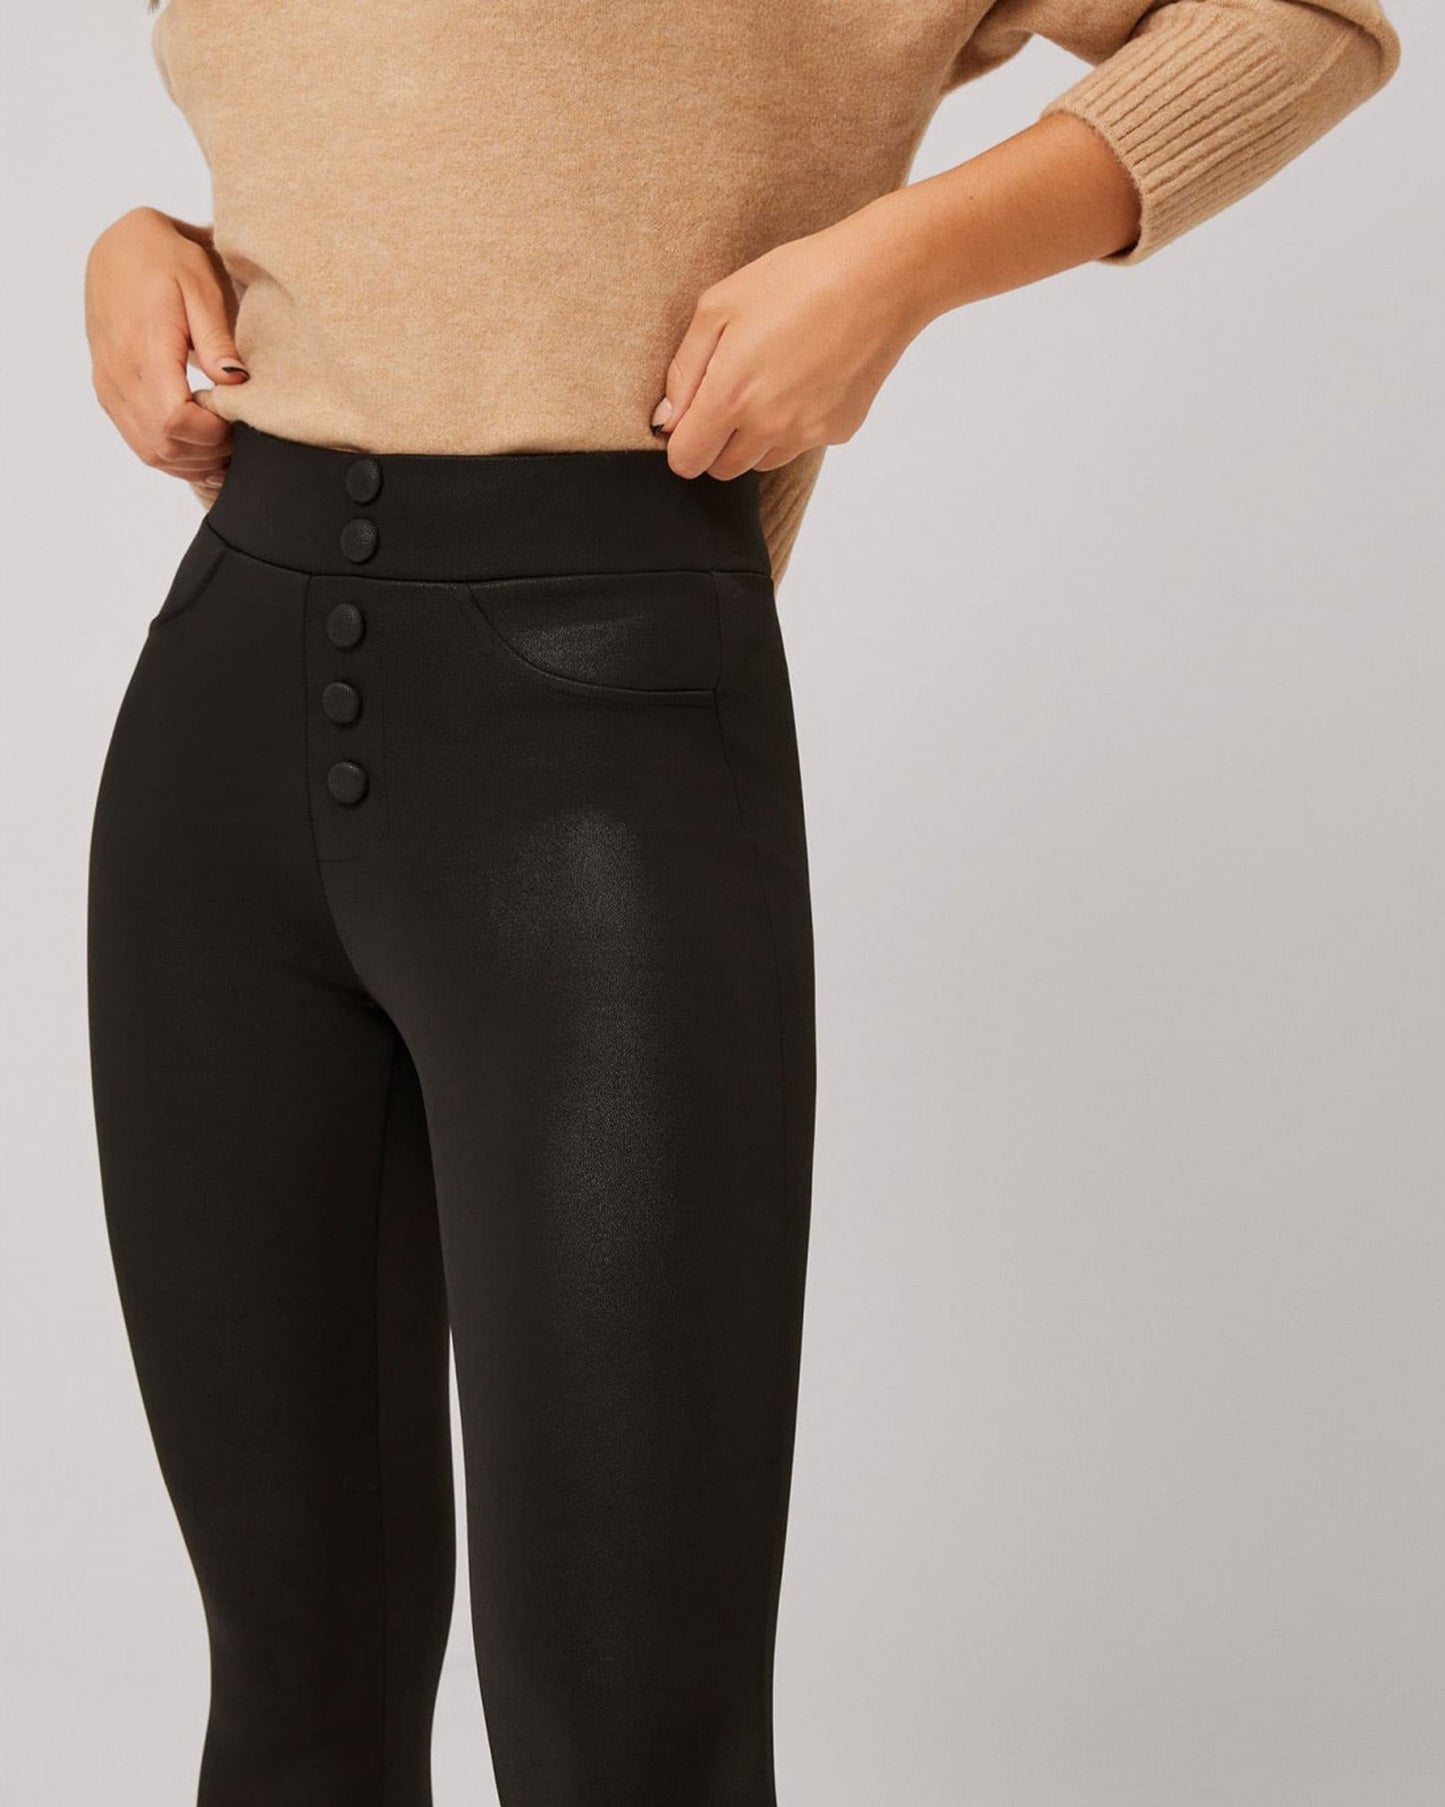 Ysabel Mora 70294 Waxed Thermal Leggings - Black high waisted trouser leggings (treggings) with waxed / faux leather effect coating, warm fleece lining, faux front black buttons and faux front pocket stitching, worn with camel jumper.